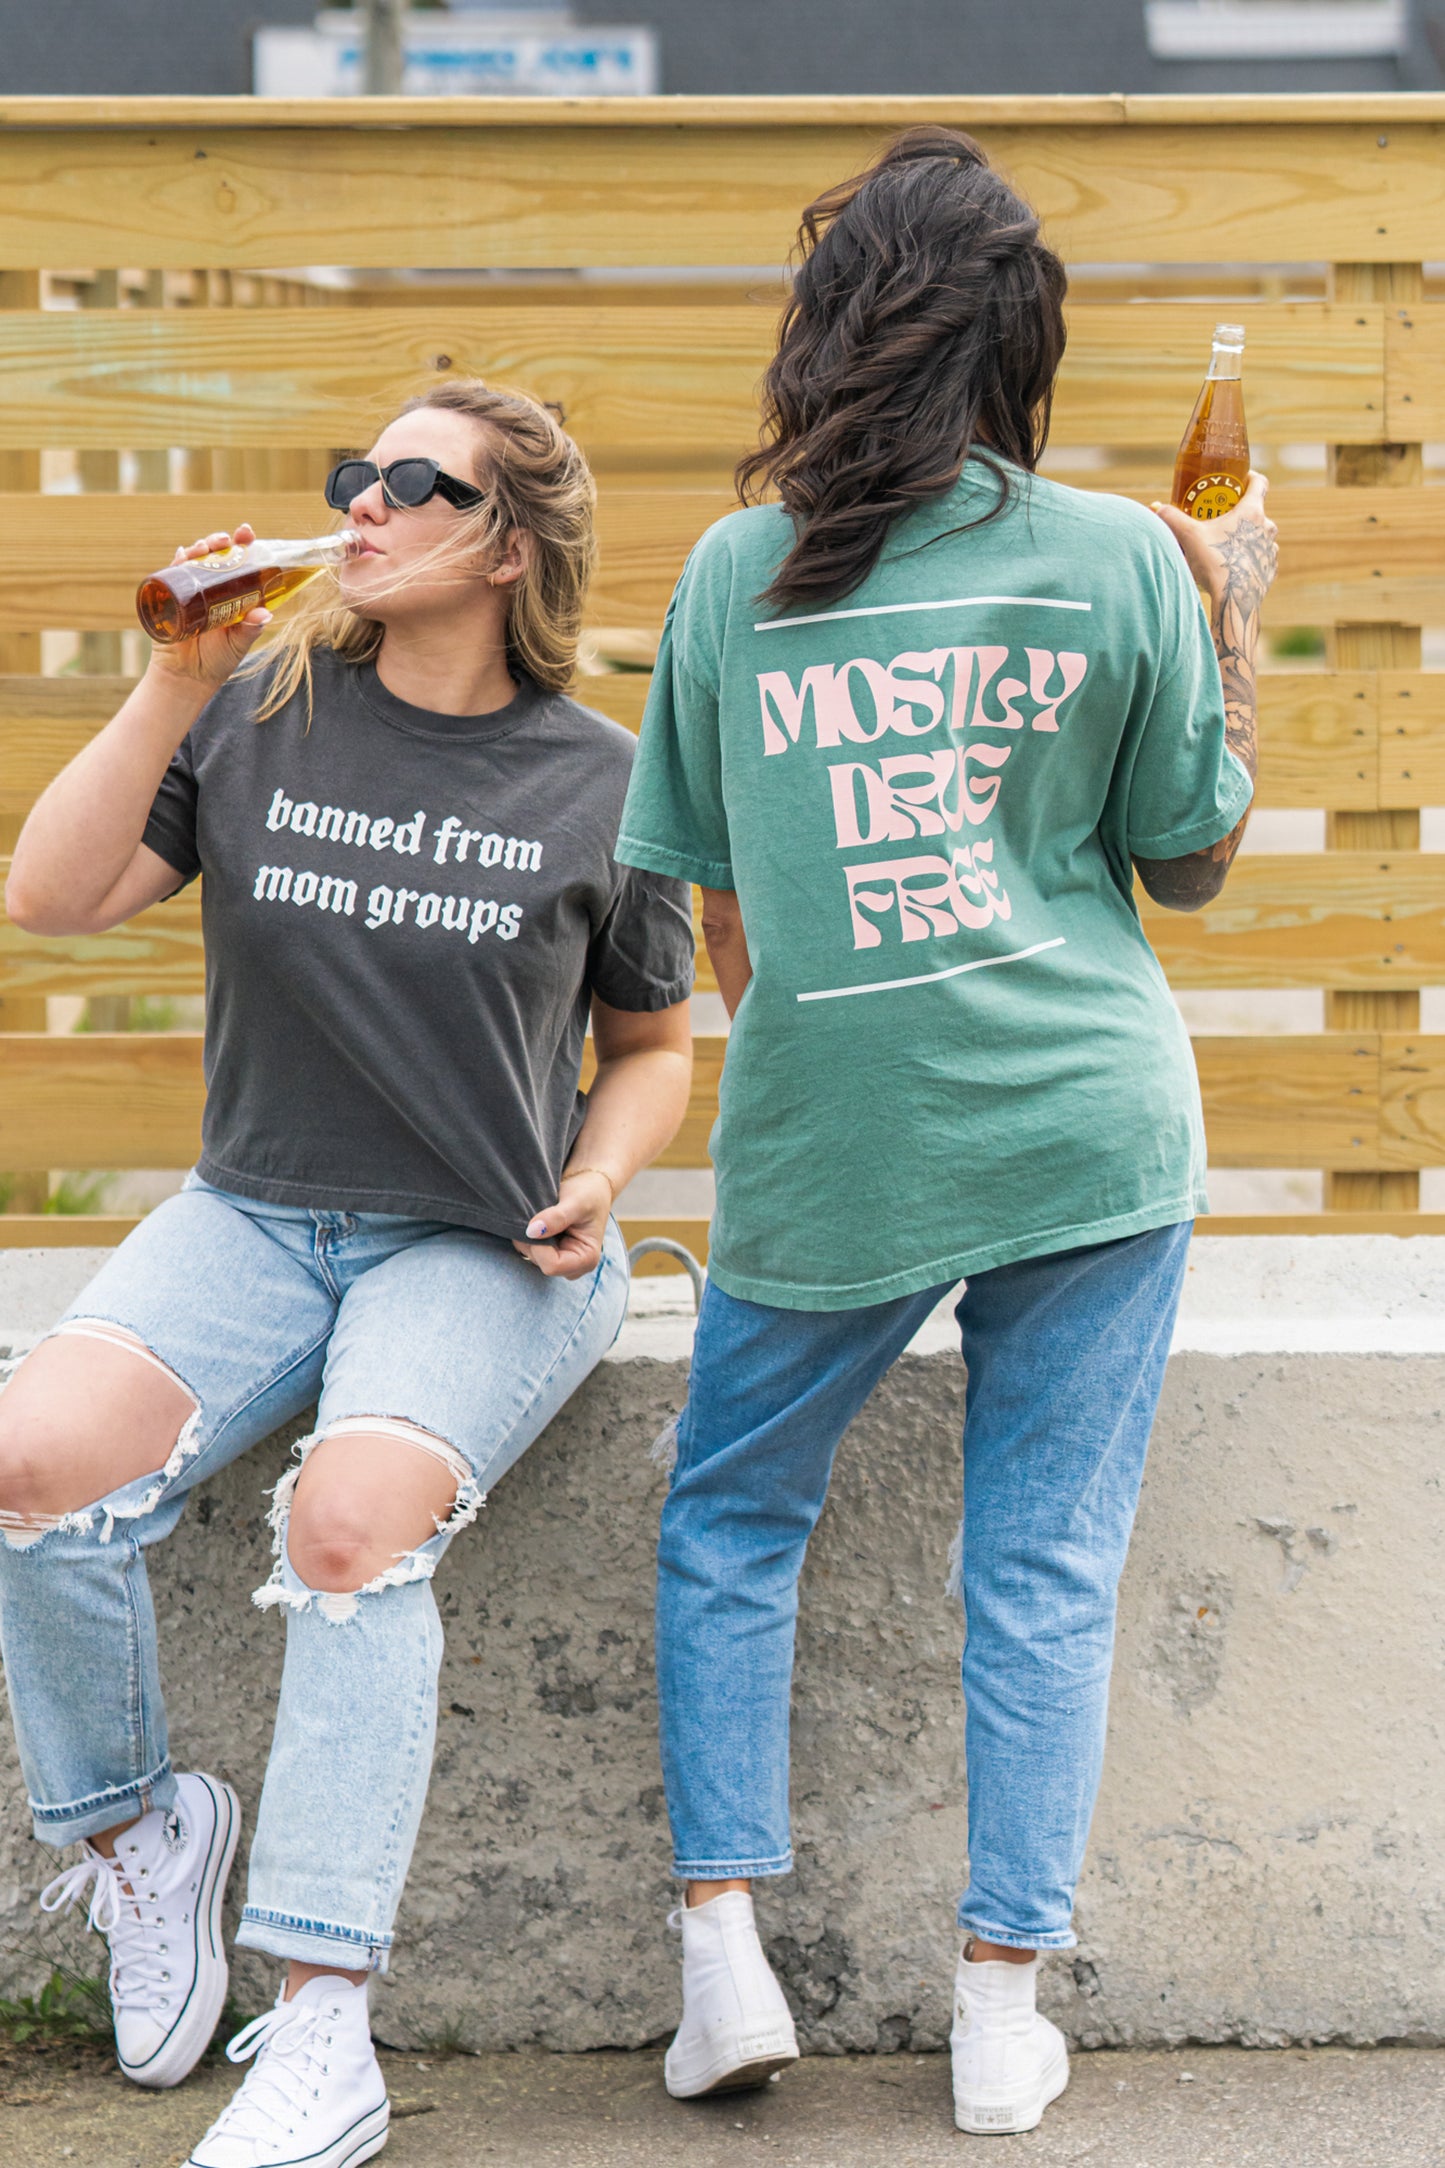 Mostly Drug Free (Front, Back, Pink) - Tee (Green)